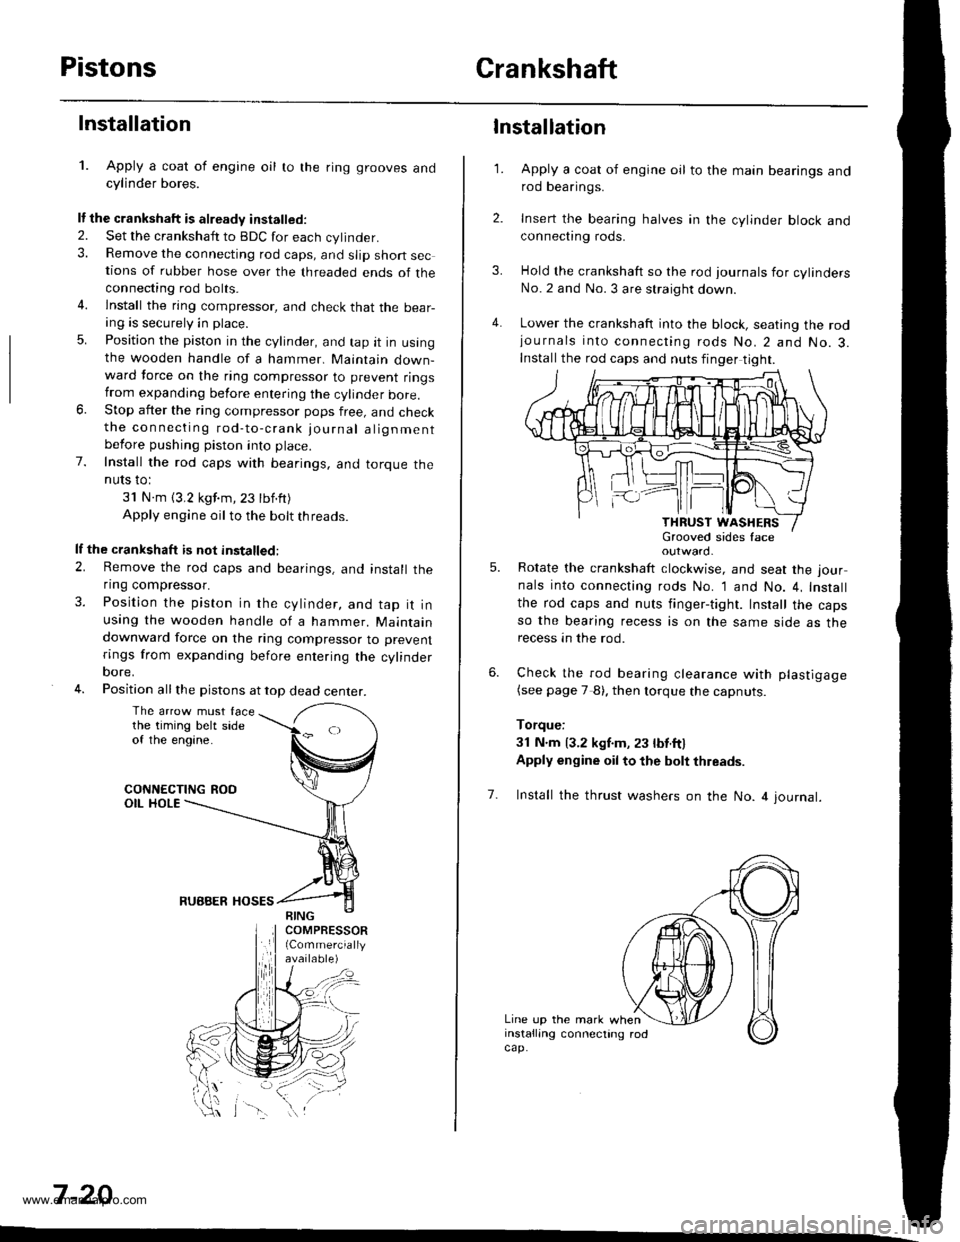 HONDA CR-V 1999 RD1-RD3 / 1.G Owners Manual 
PistonsCrankshaft
Installation
1. Apply a coat of engine oil to the ring grooves andcylinder bores.
It the crankshaft is already installed.
2. Set the crankshatt to BDC for each cylinder.3. Remove th